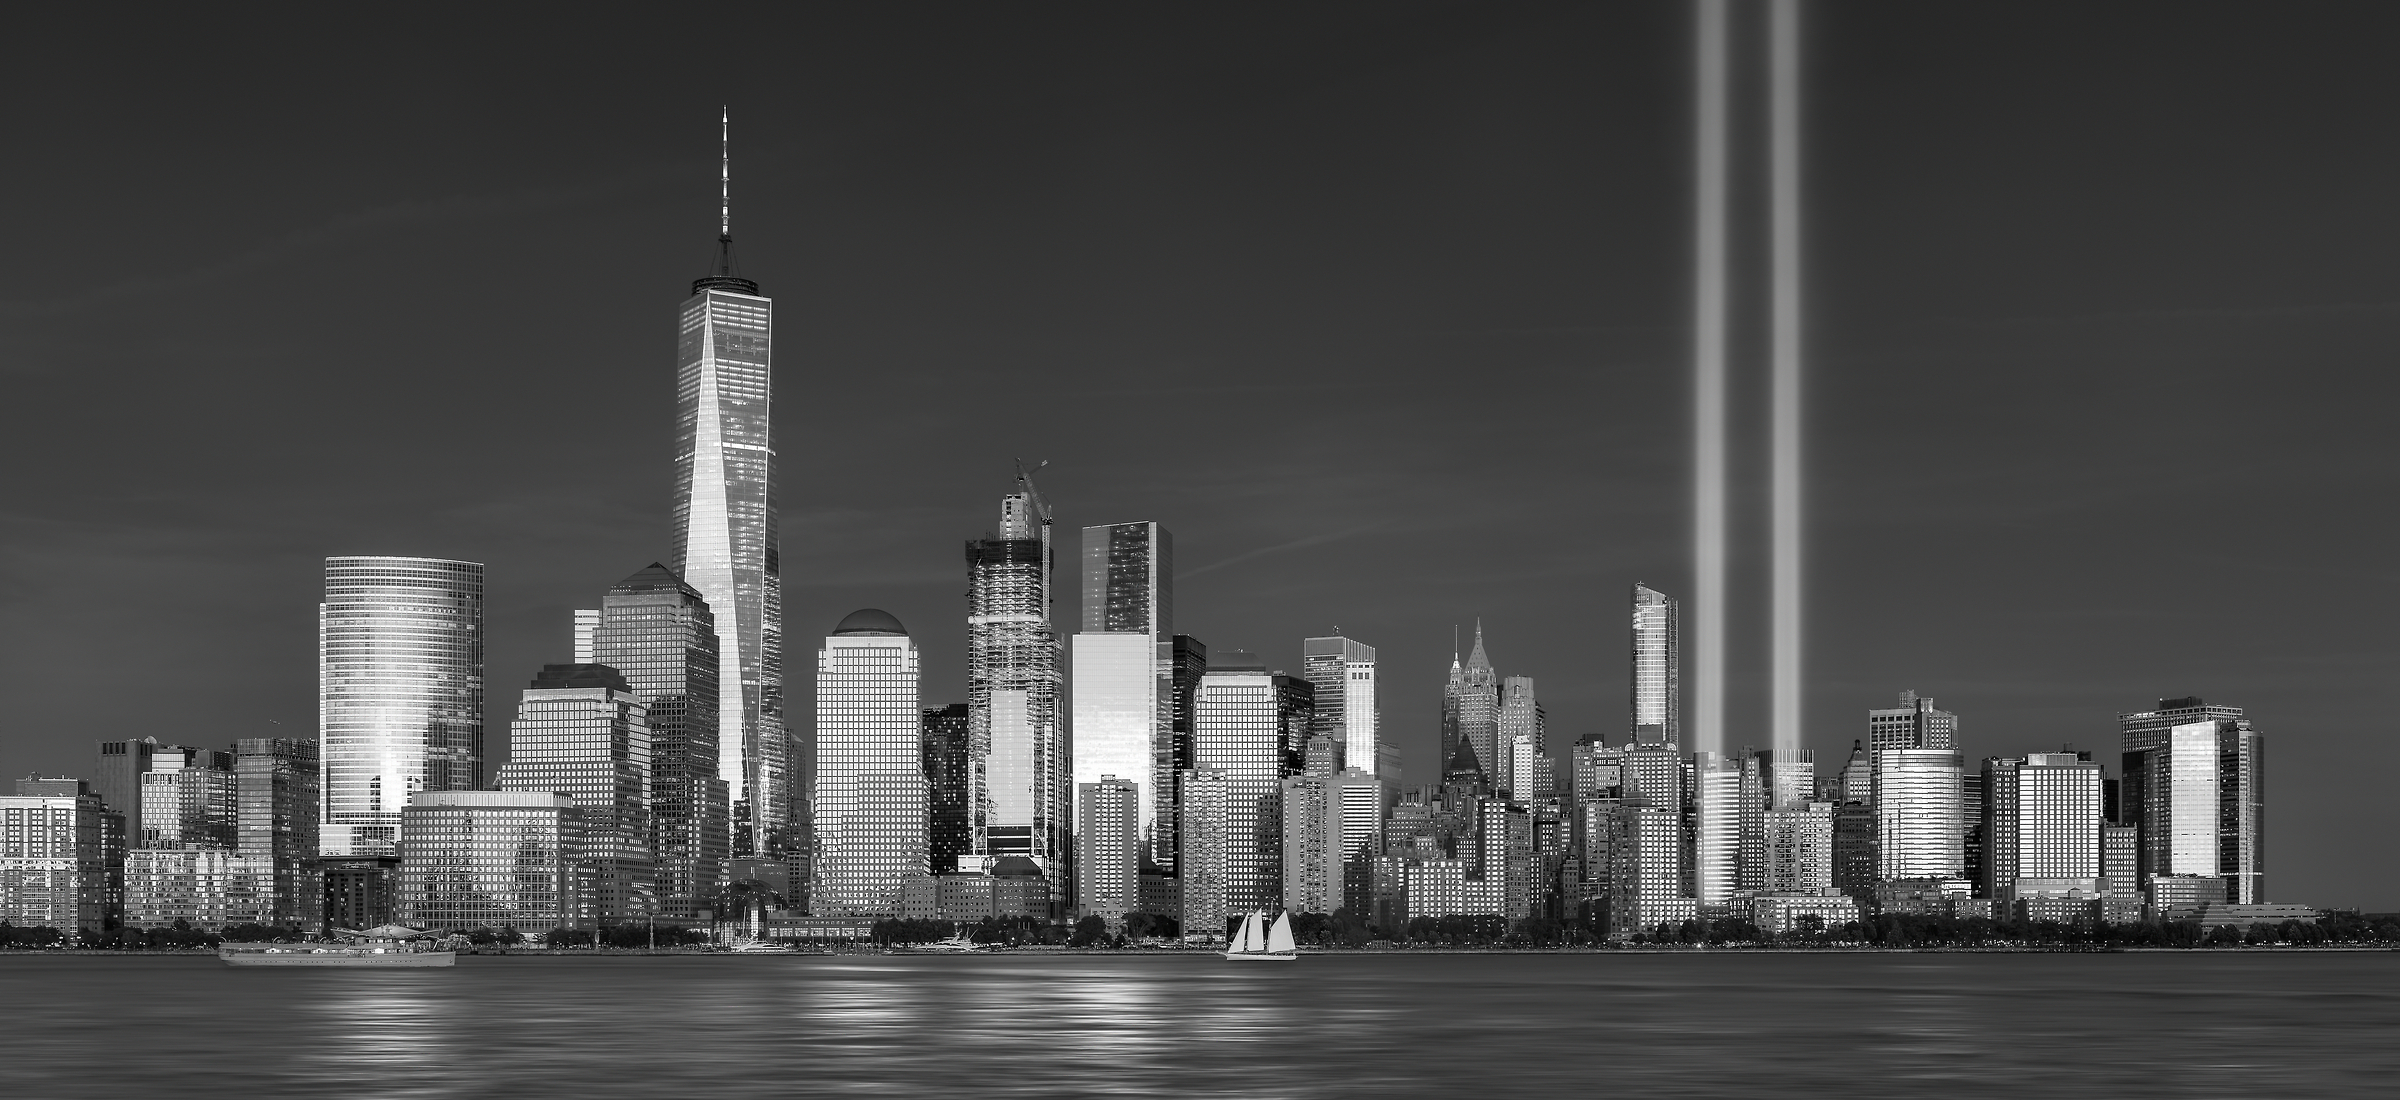 407 megapixels! The highest resolution VAST photo of the September 11th 9/11 Tribute in Light memorial, the World Trade Center, and the Manhattan city skyline at sunset in New York City; created by Dan Piech